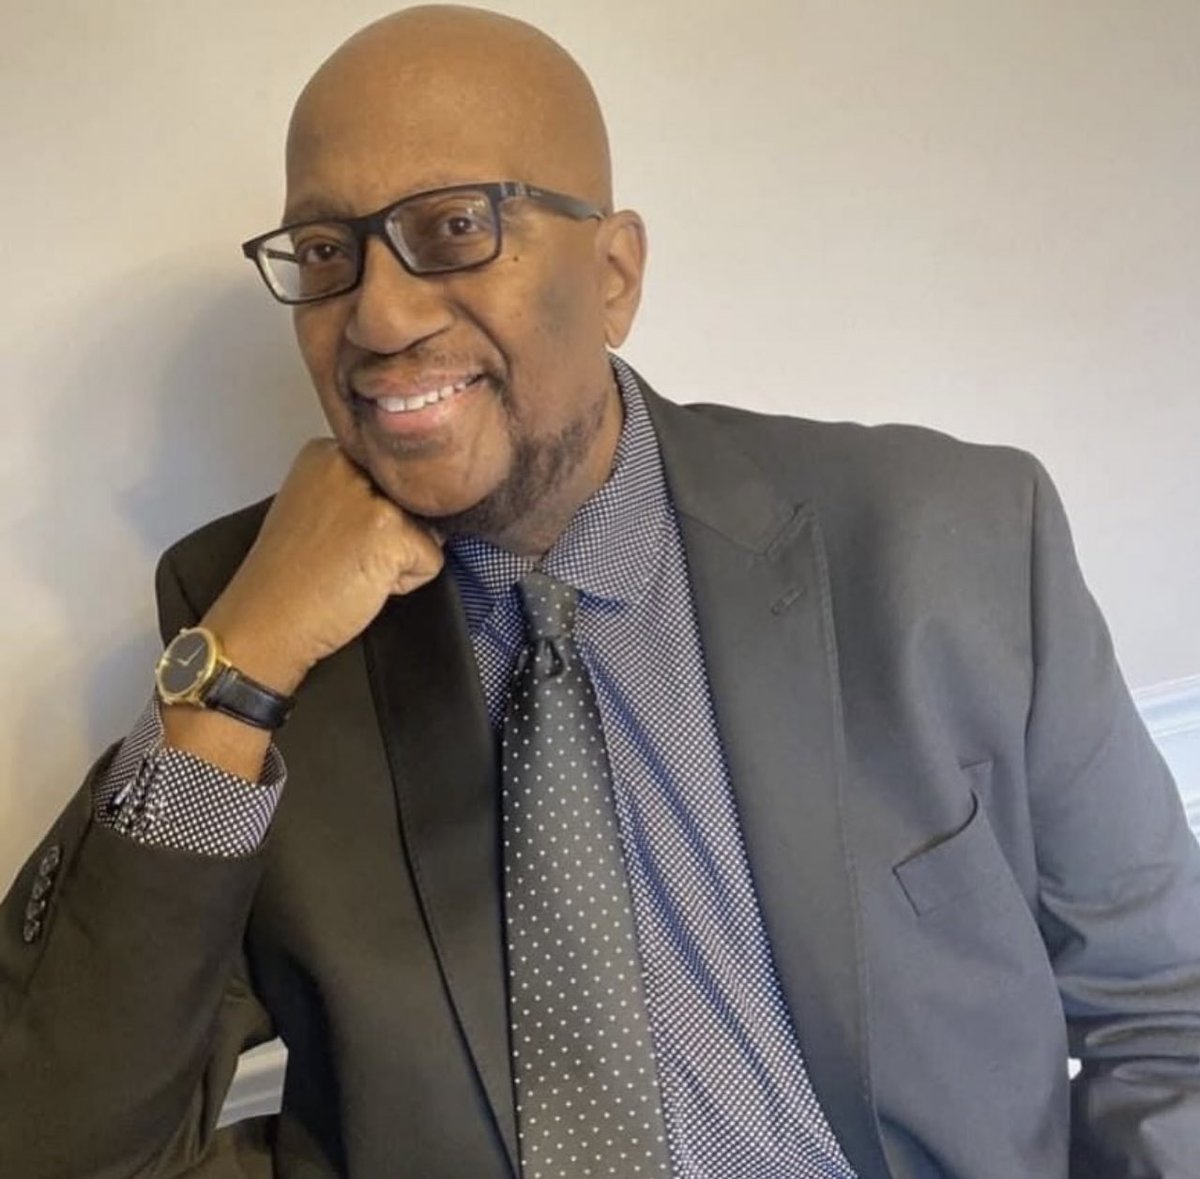 Sad news: Vernon A. Williams, former Immediate Past President of the Indianapolis Association of Black Journalists, passed away over the weekend at 74. A storyteller, mentor, and friend, he touched many lives. 

His legacy of excellence and inclusivity lives on.